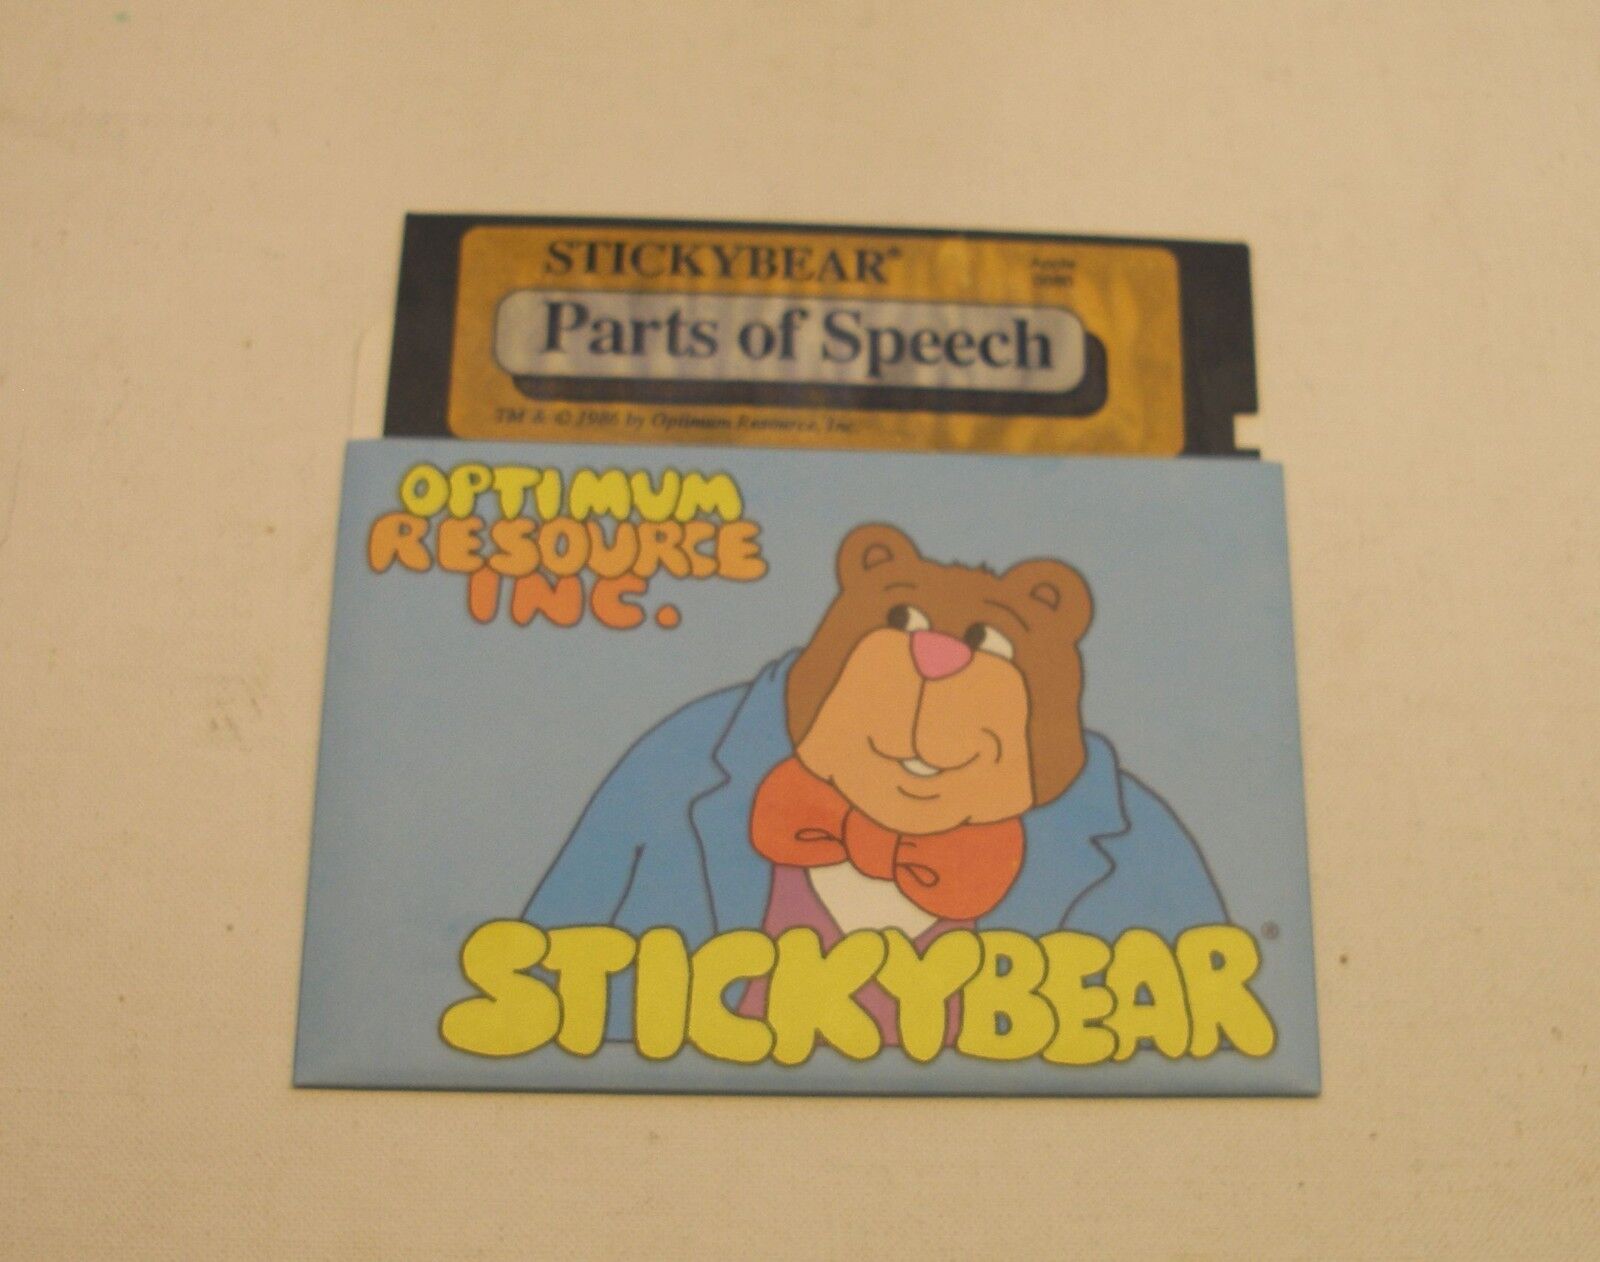 Stickybear Parts of Speech Disk by Weekly Reader for Apple IIe, Apple IIc, IIGS